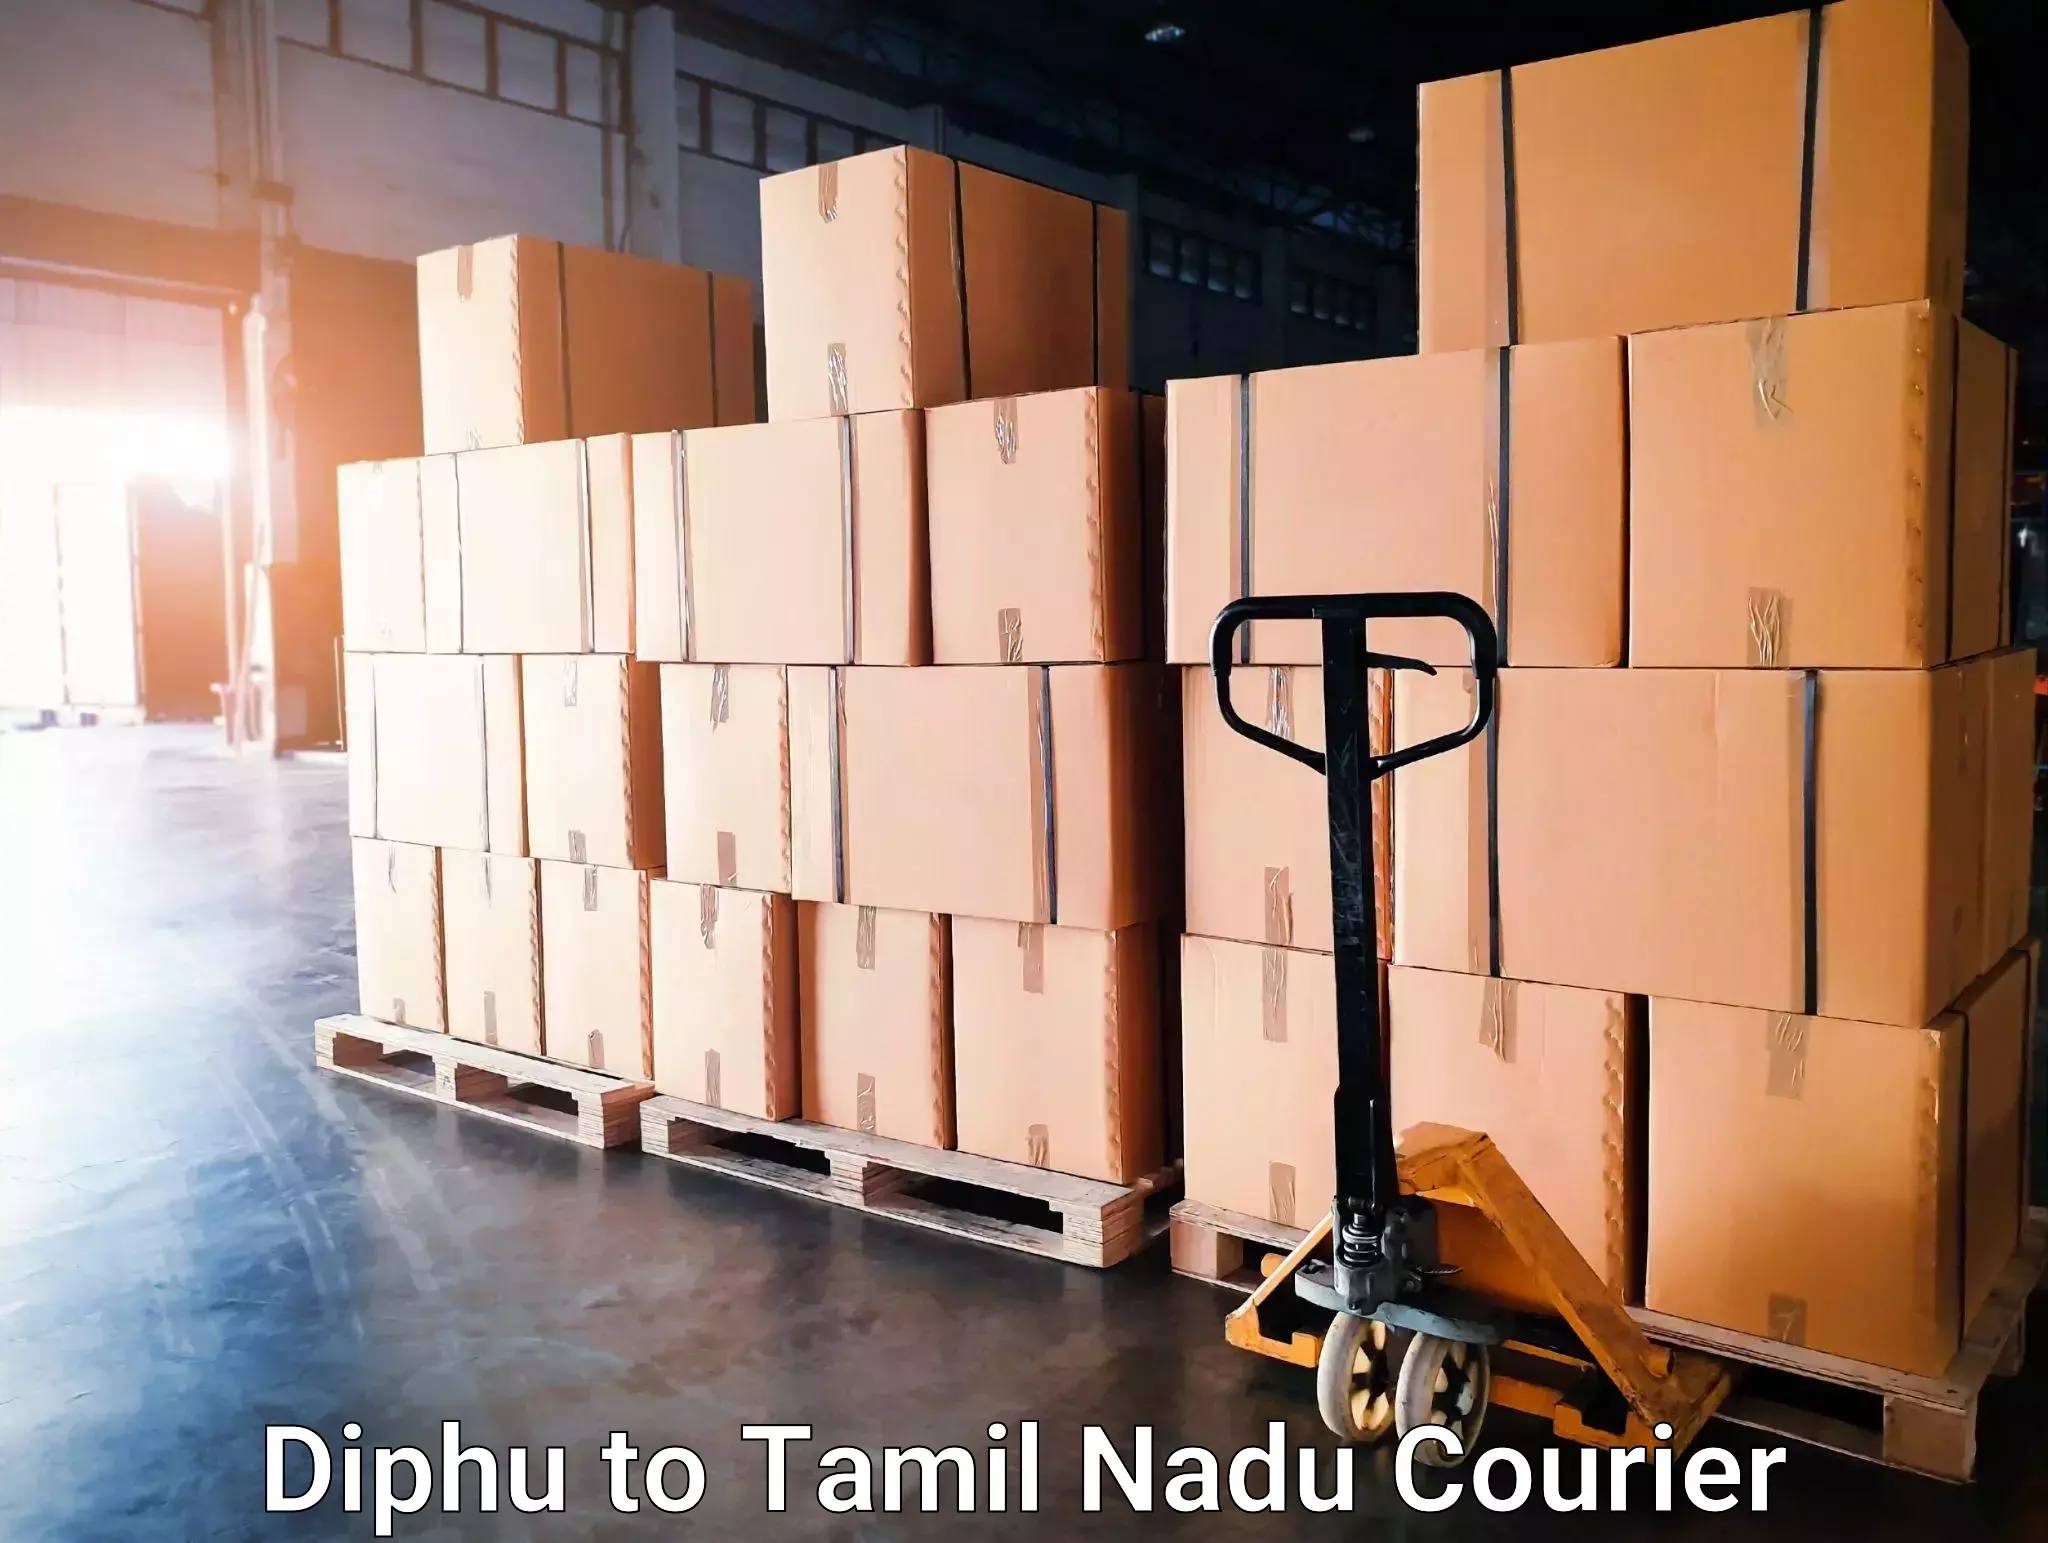 Optimized delivery routes Diphu to Virudhunagar